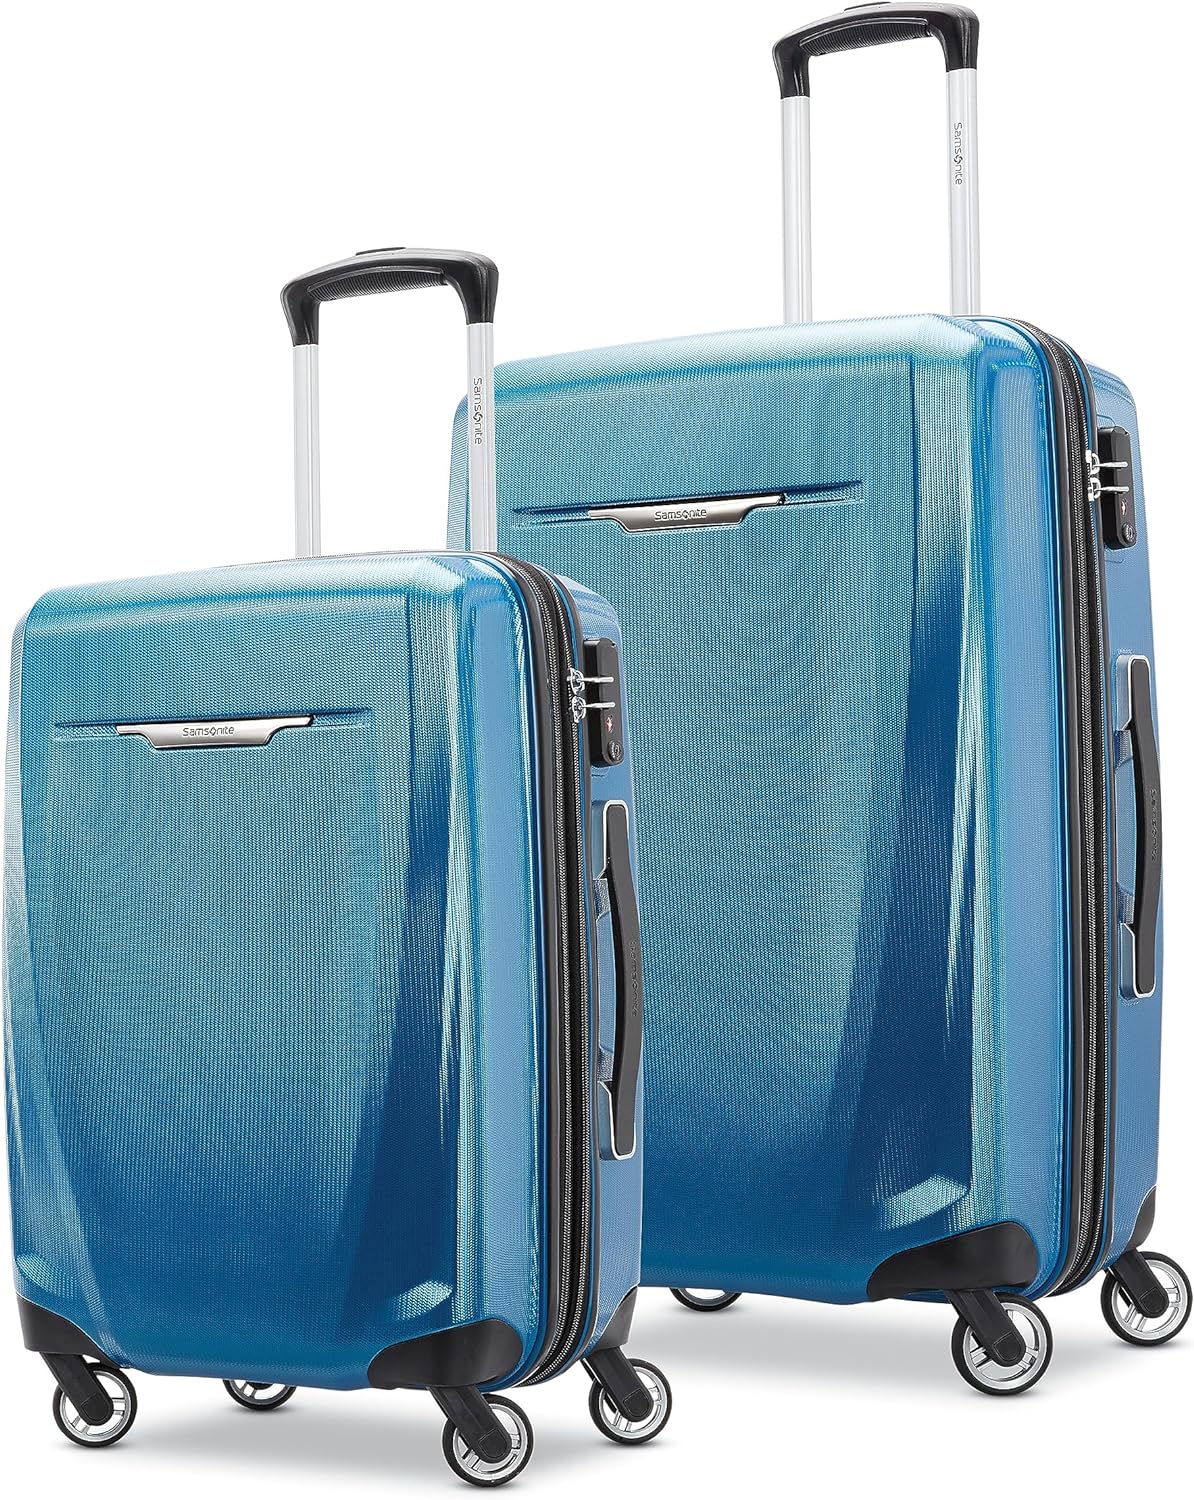 Samsonite Winfield 3 DLX Hardside Expandable Luggage Review